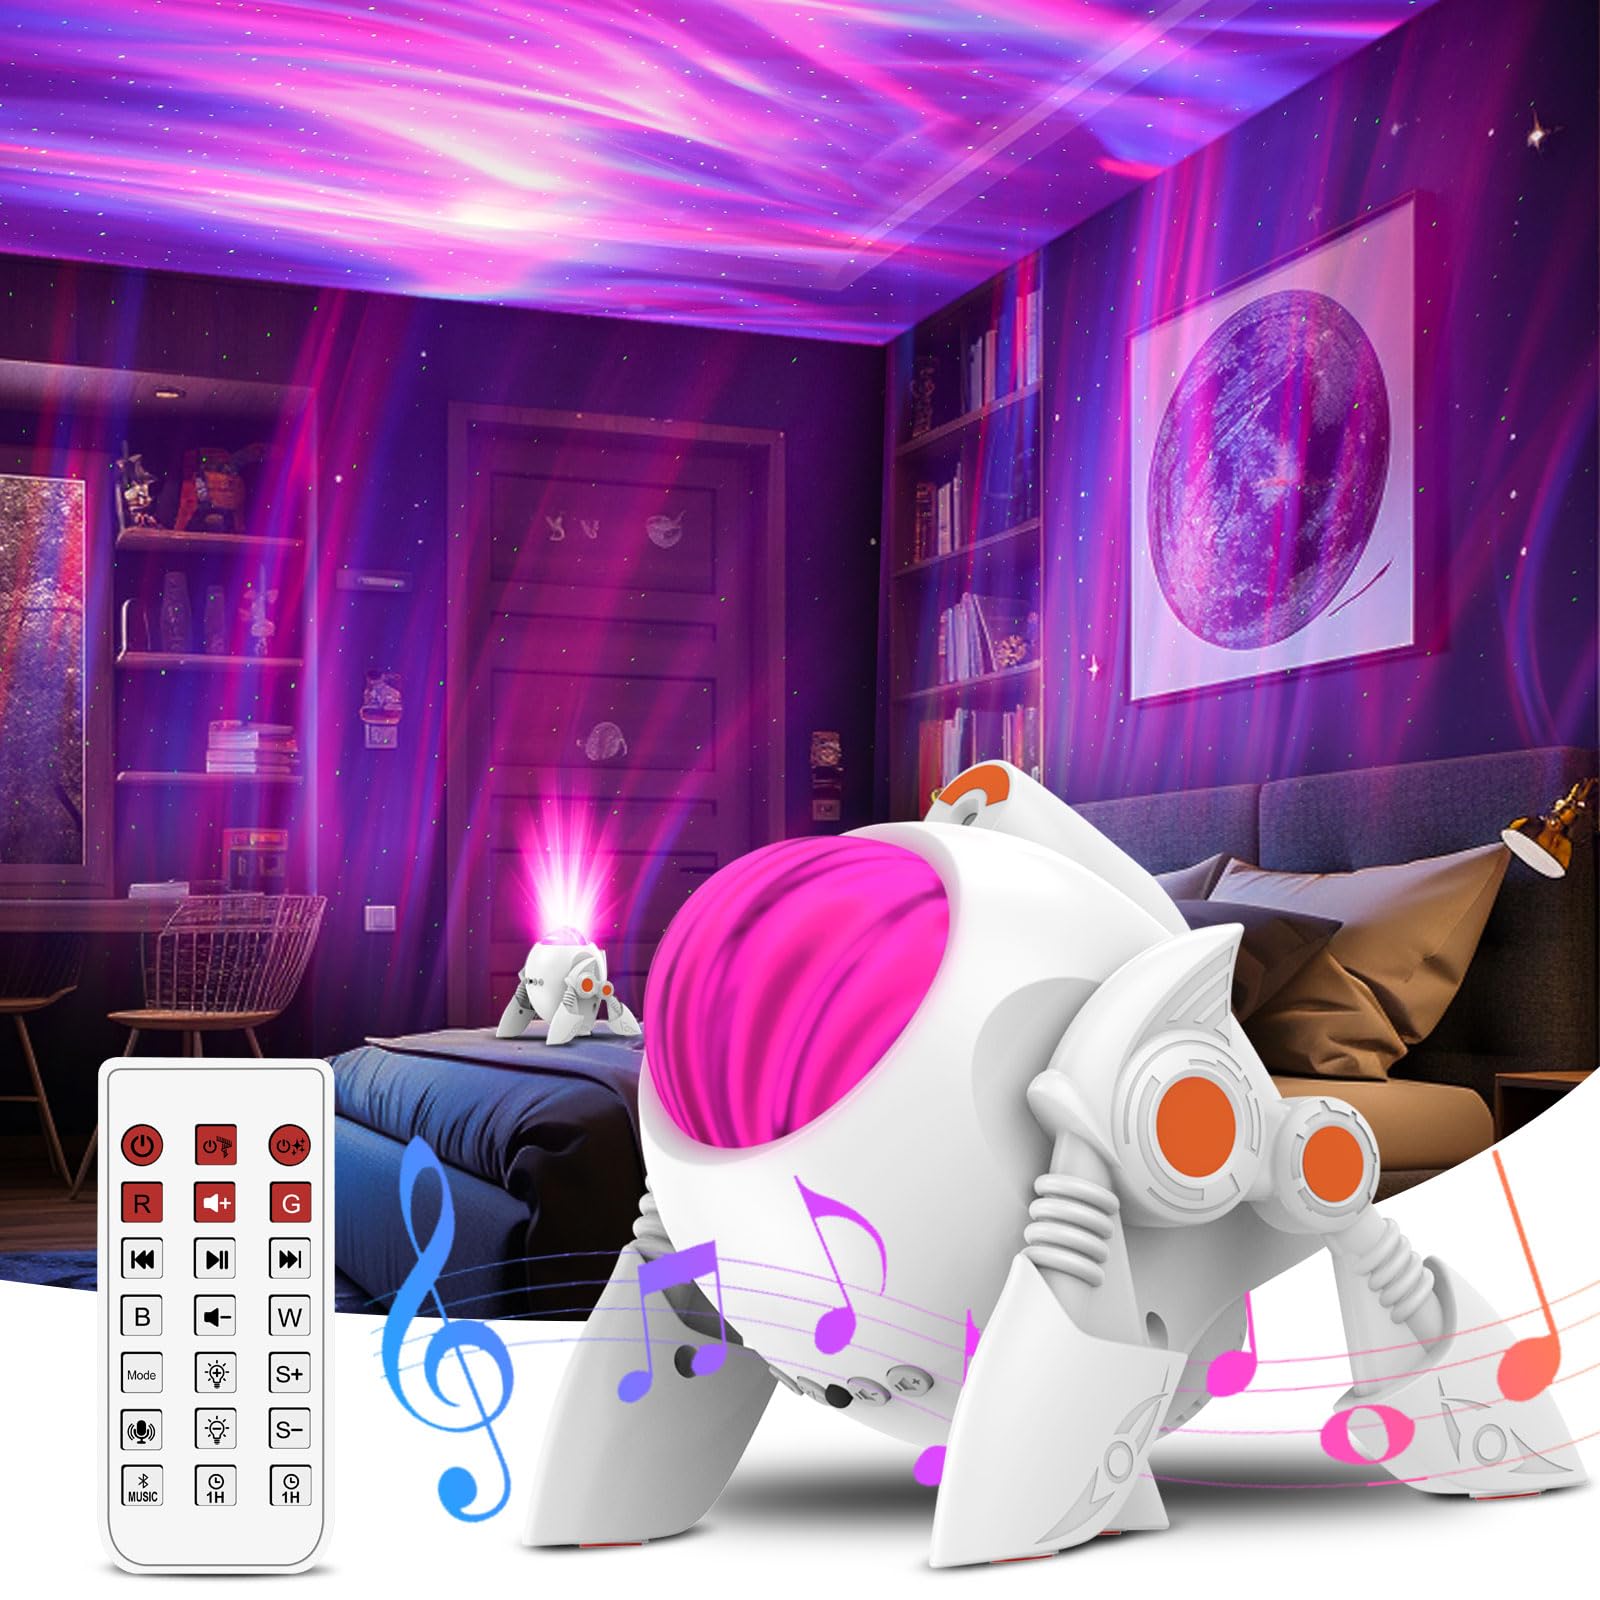 YOVAKO Star Projector Galaxy Light, Galaxy Projector for Bedroom, Space Buddy Light Projector with 29 Light Effects, Timer and R